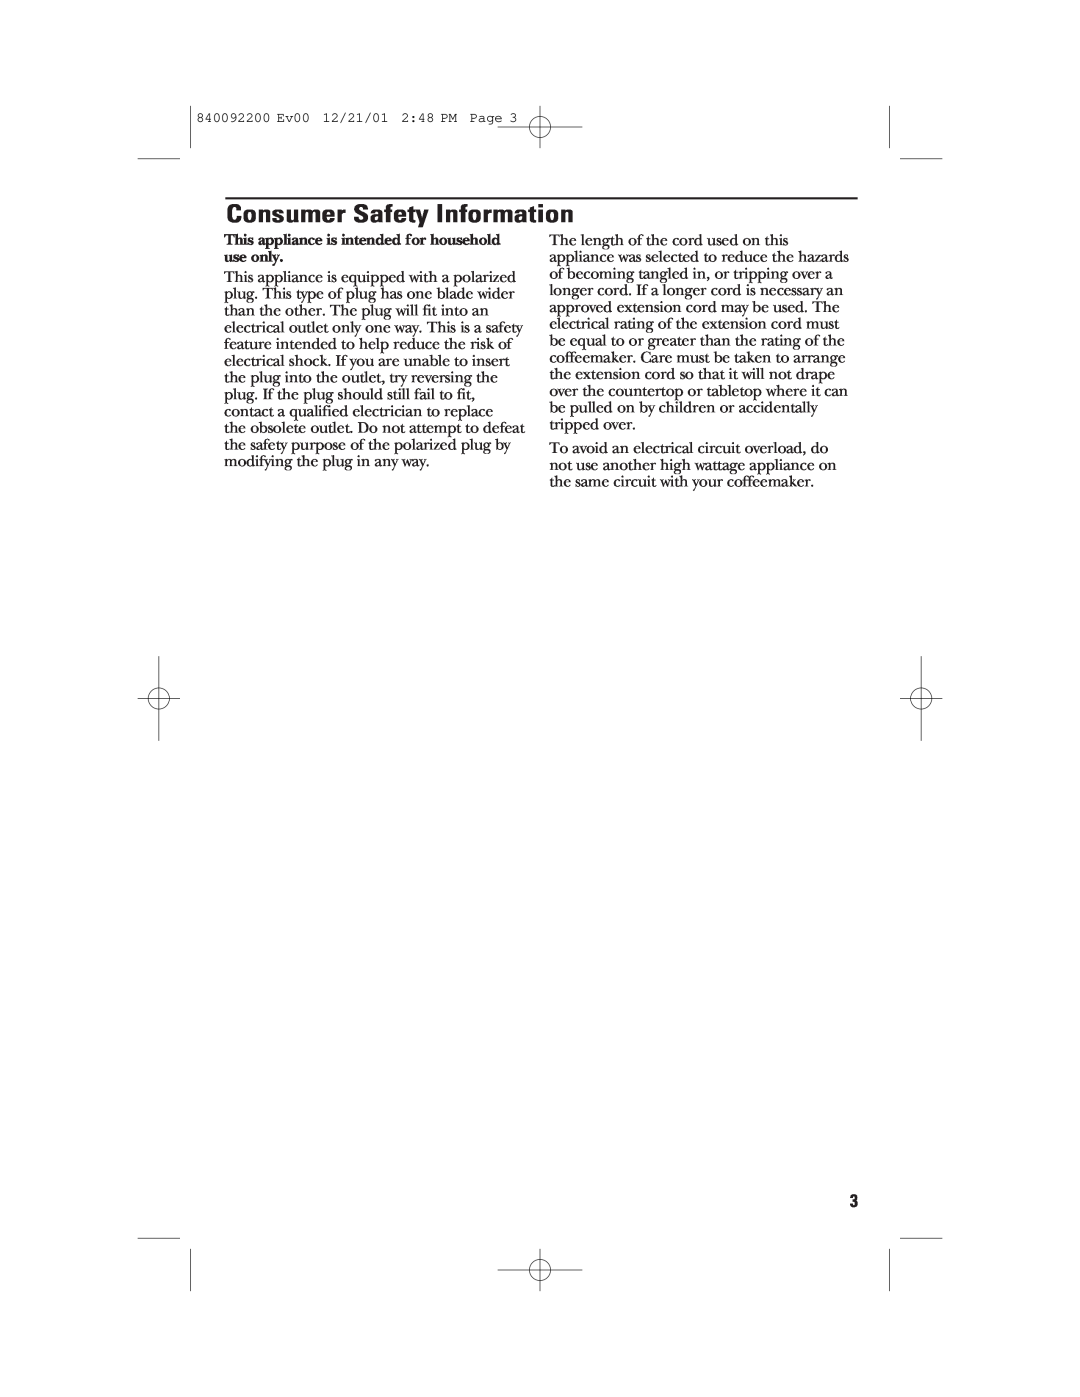 GE 106721, 840092200 manual Consumer Safety Information, This appliance is intended for household use only 